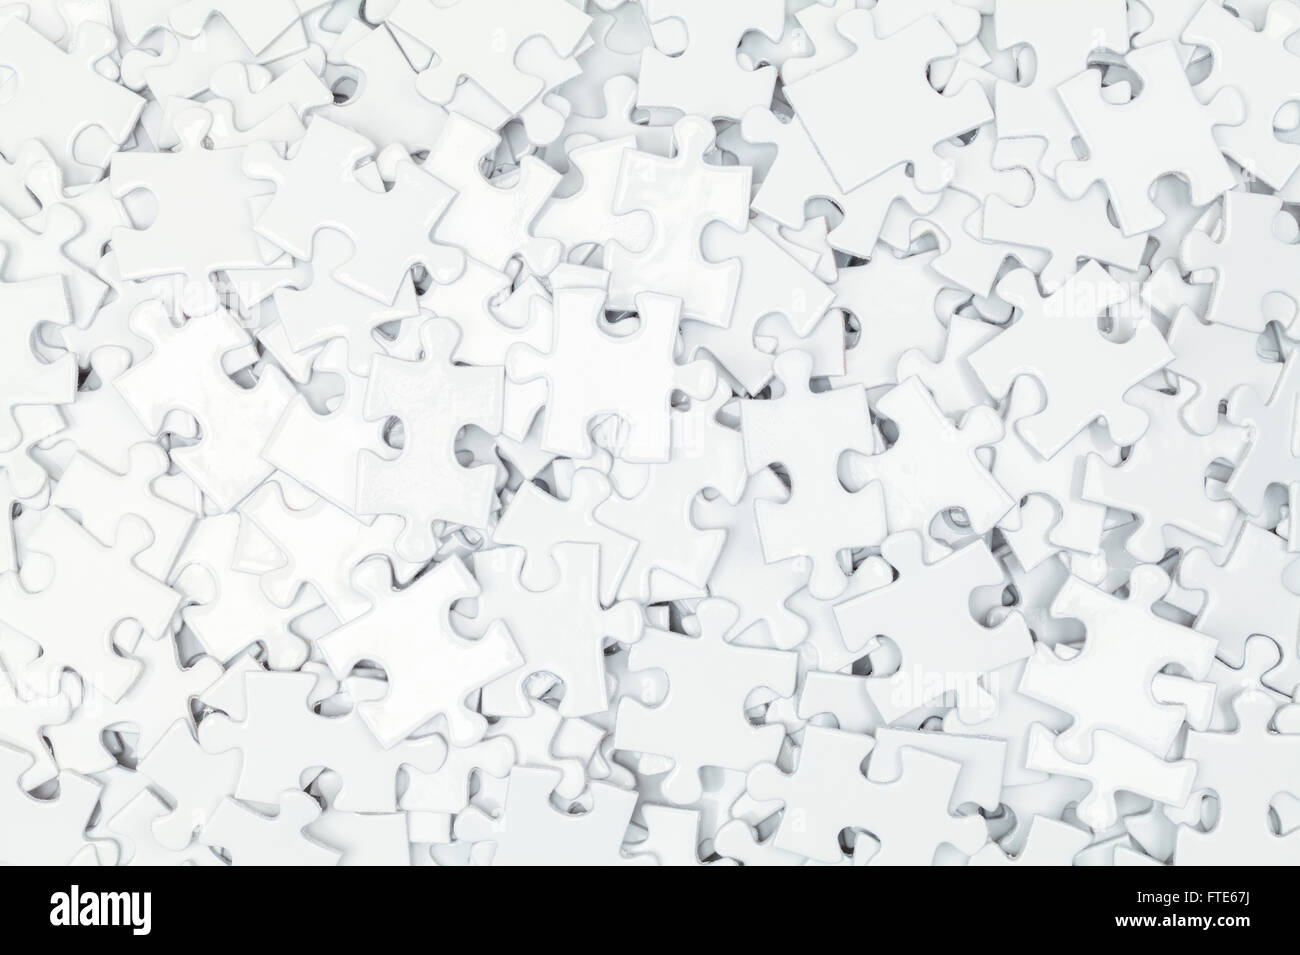 Pile of White Blank Puzzle Pieces Background. Stock Photo